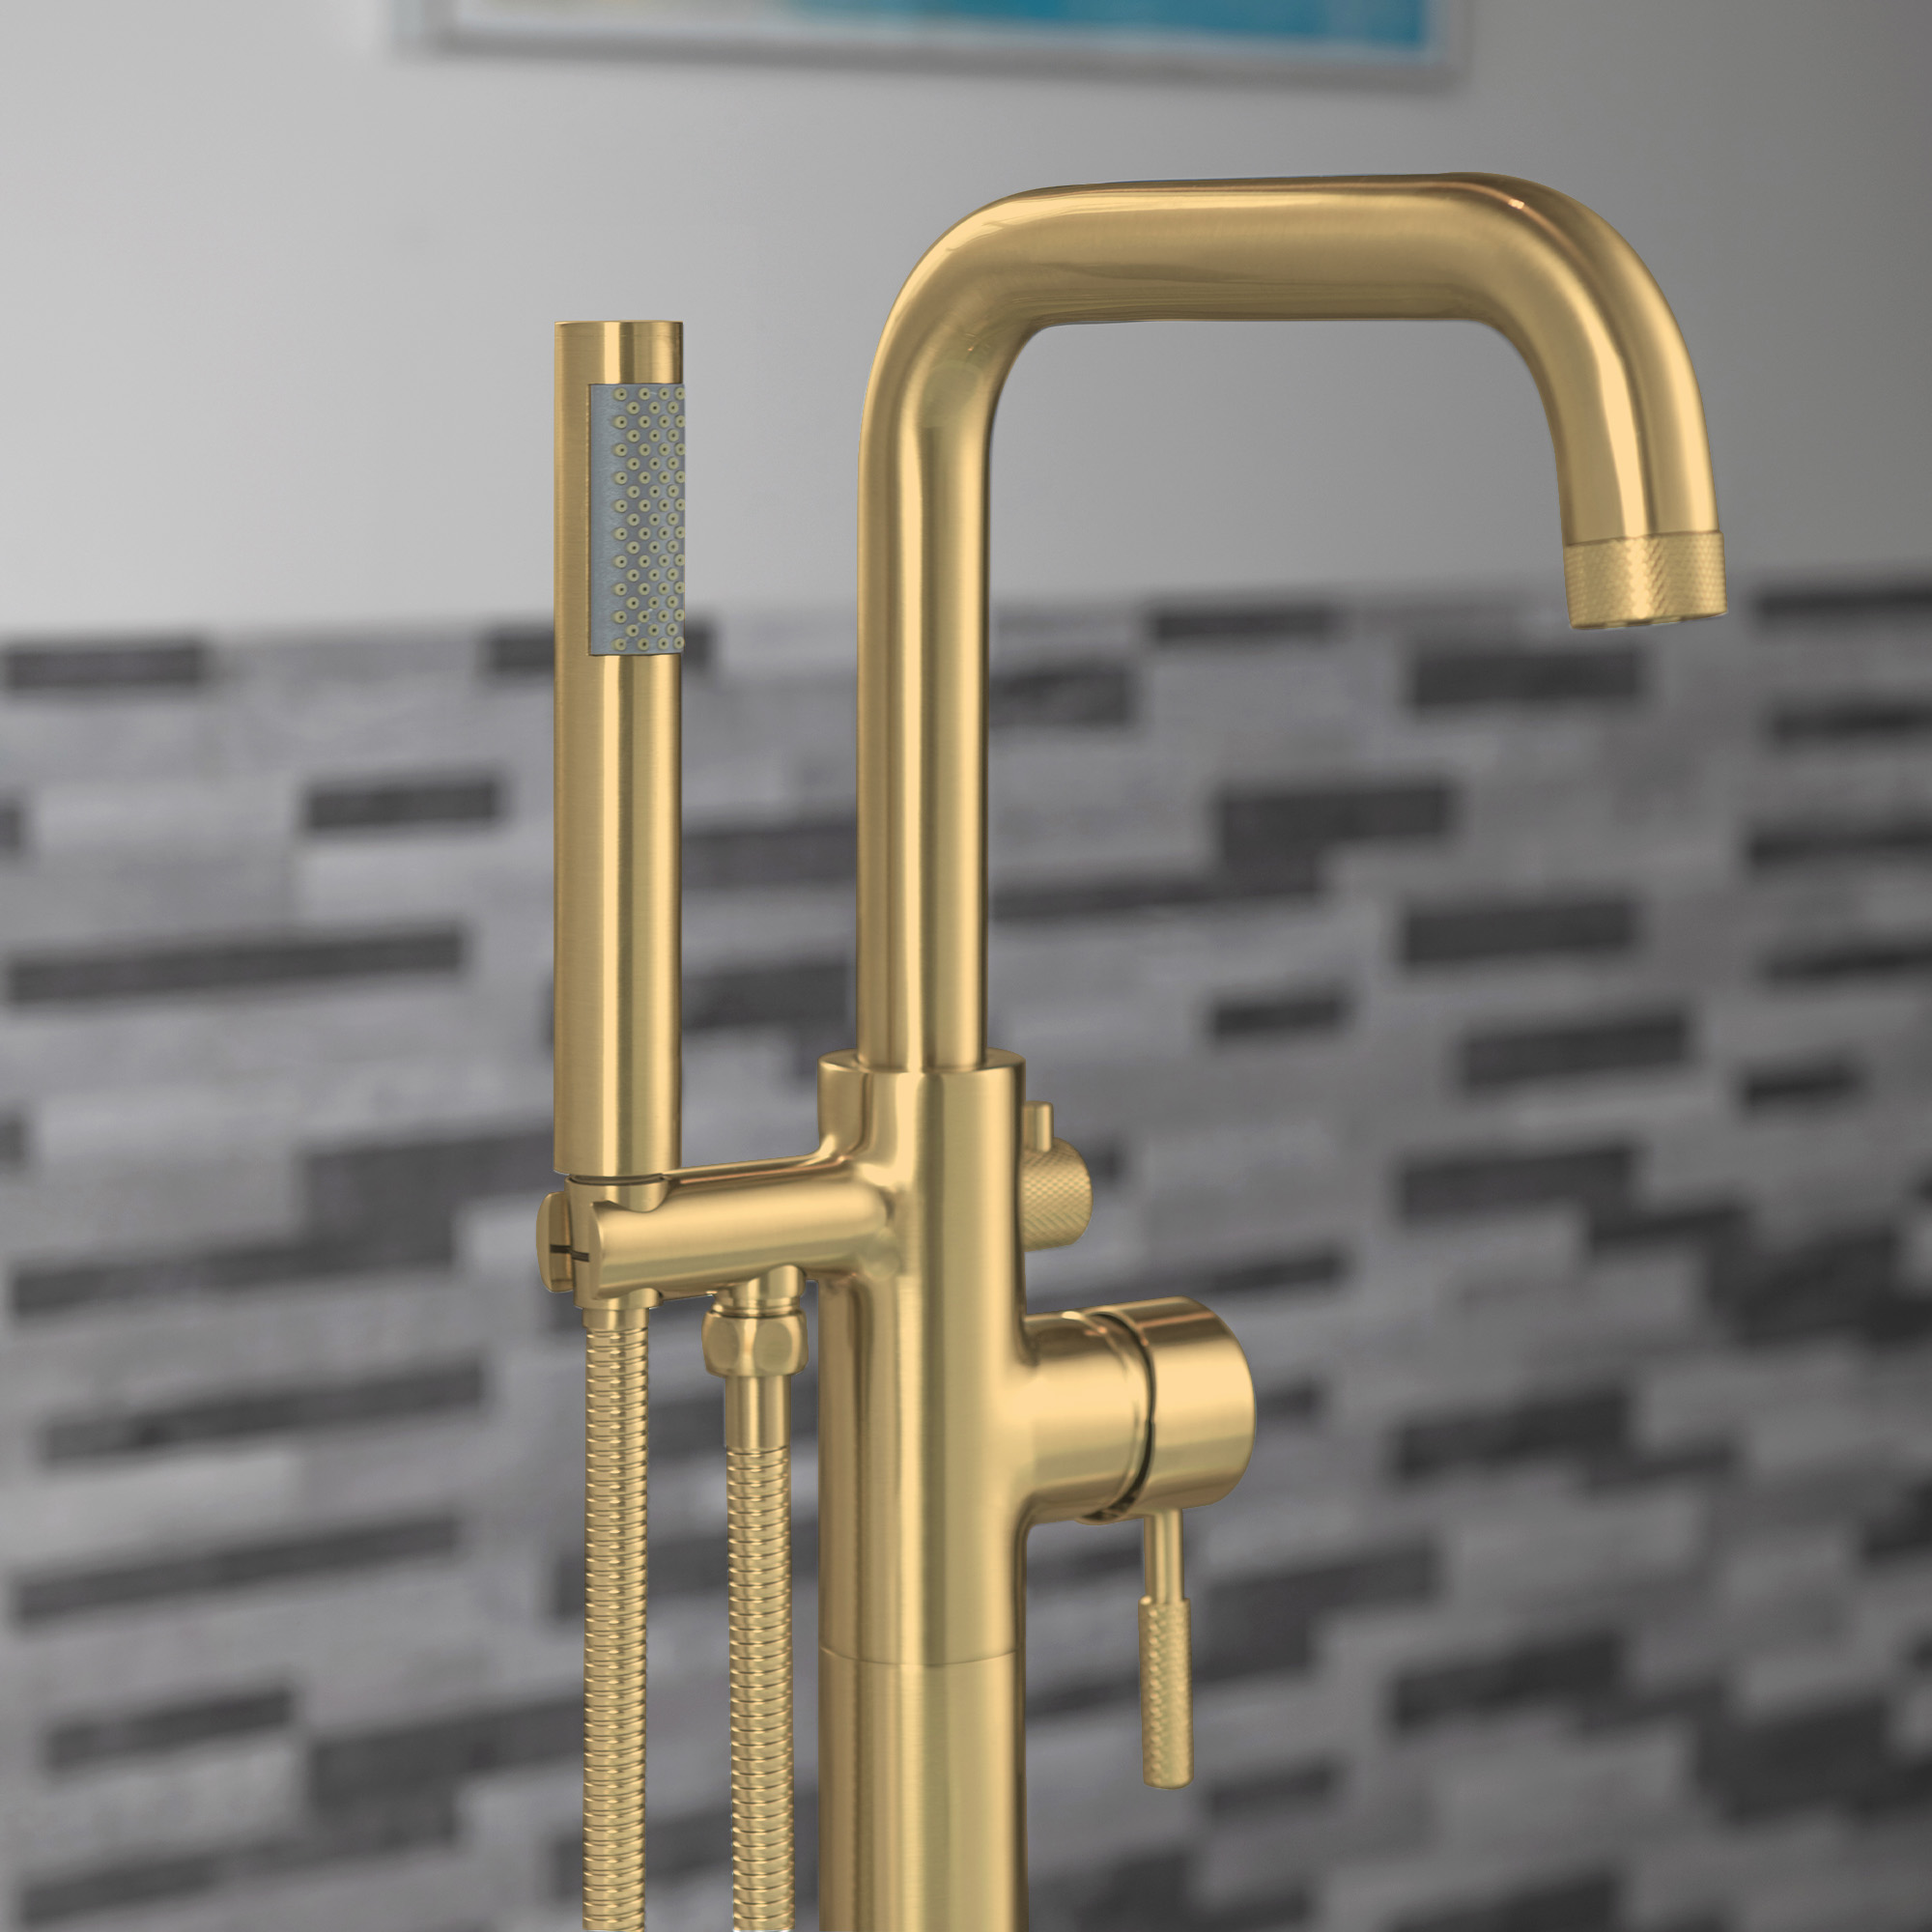  WOODBRIDGE F0073BGRD Contemporary Single Handle Floor Mount Freestanding Tub Filler Faucet with Cylinder Style Hand Shower in Brushed Gold Finish._14823